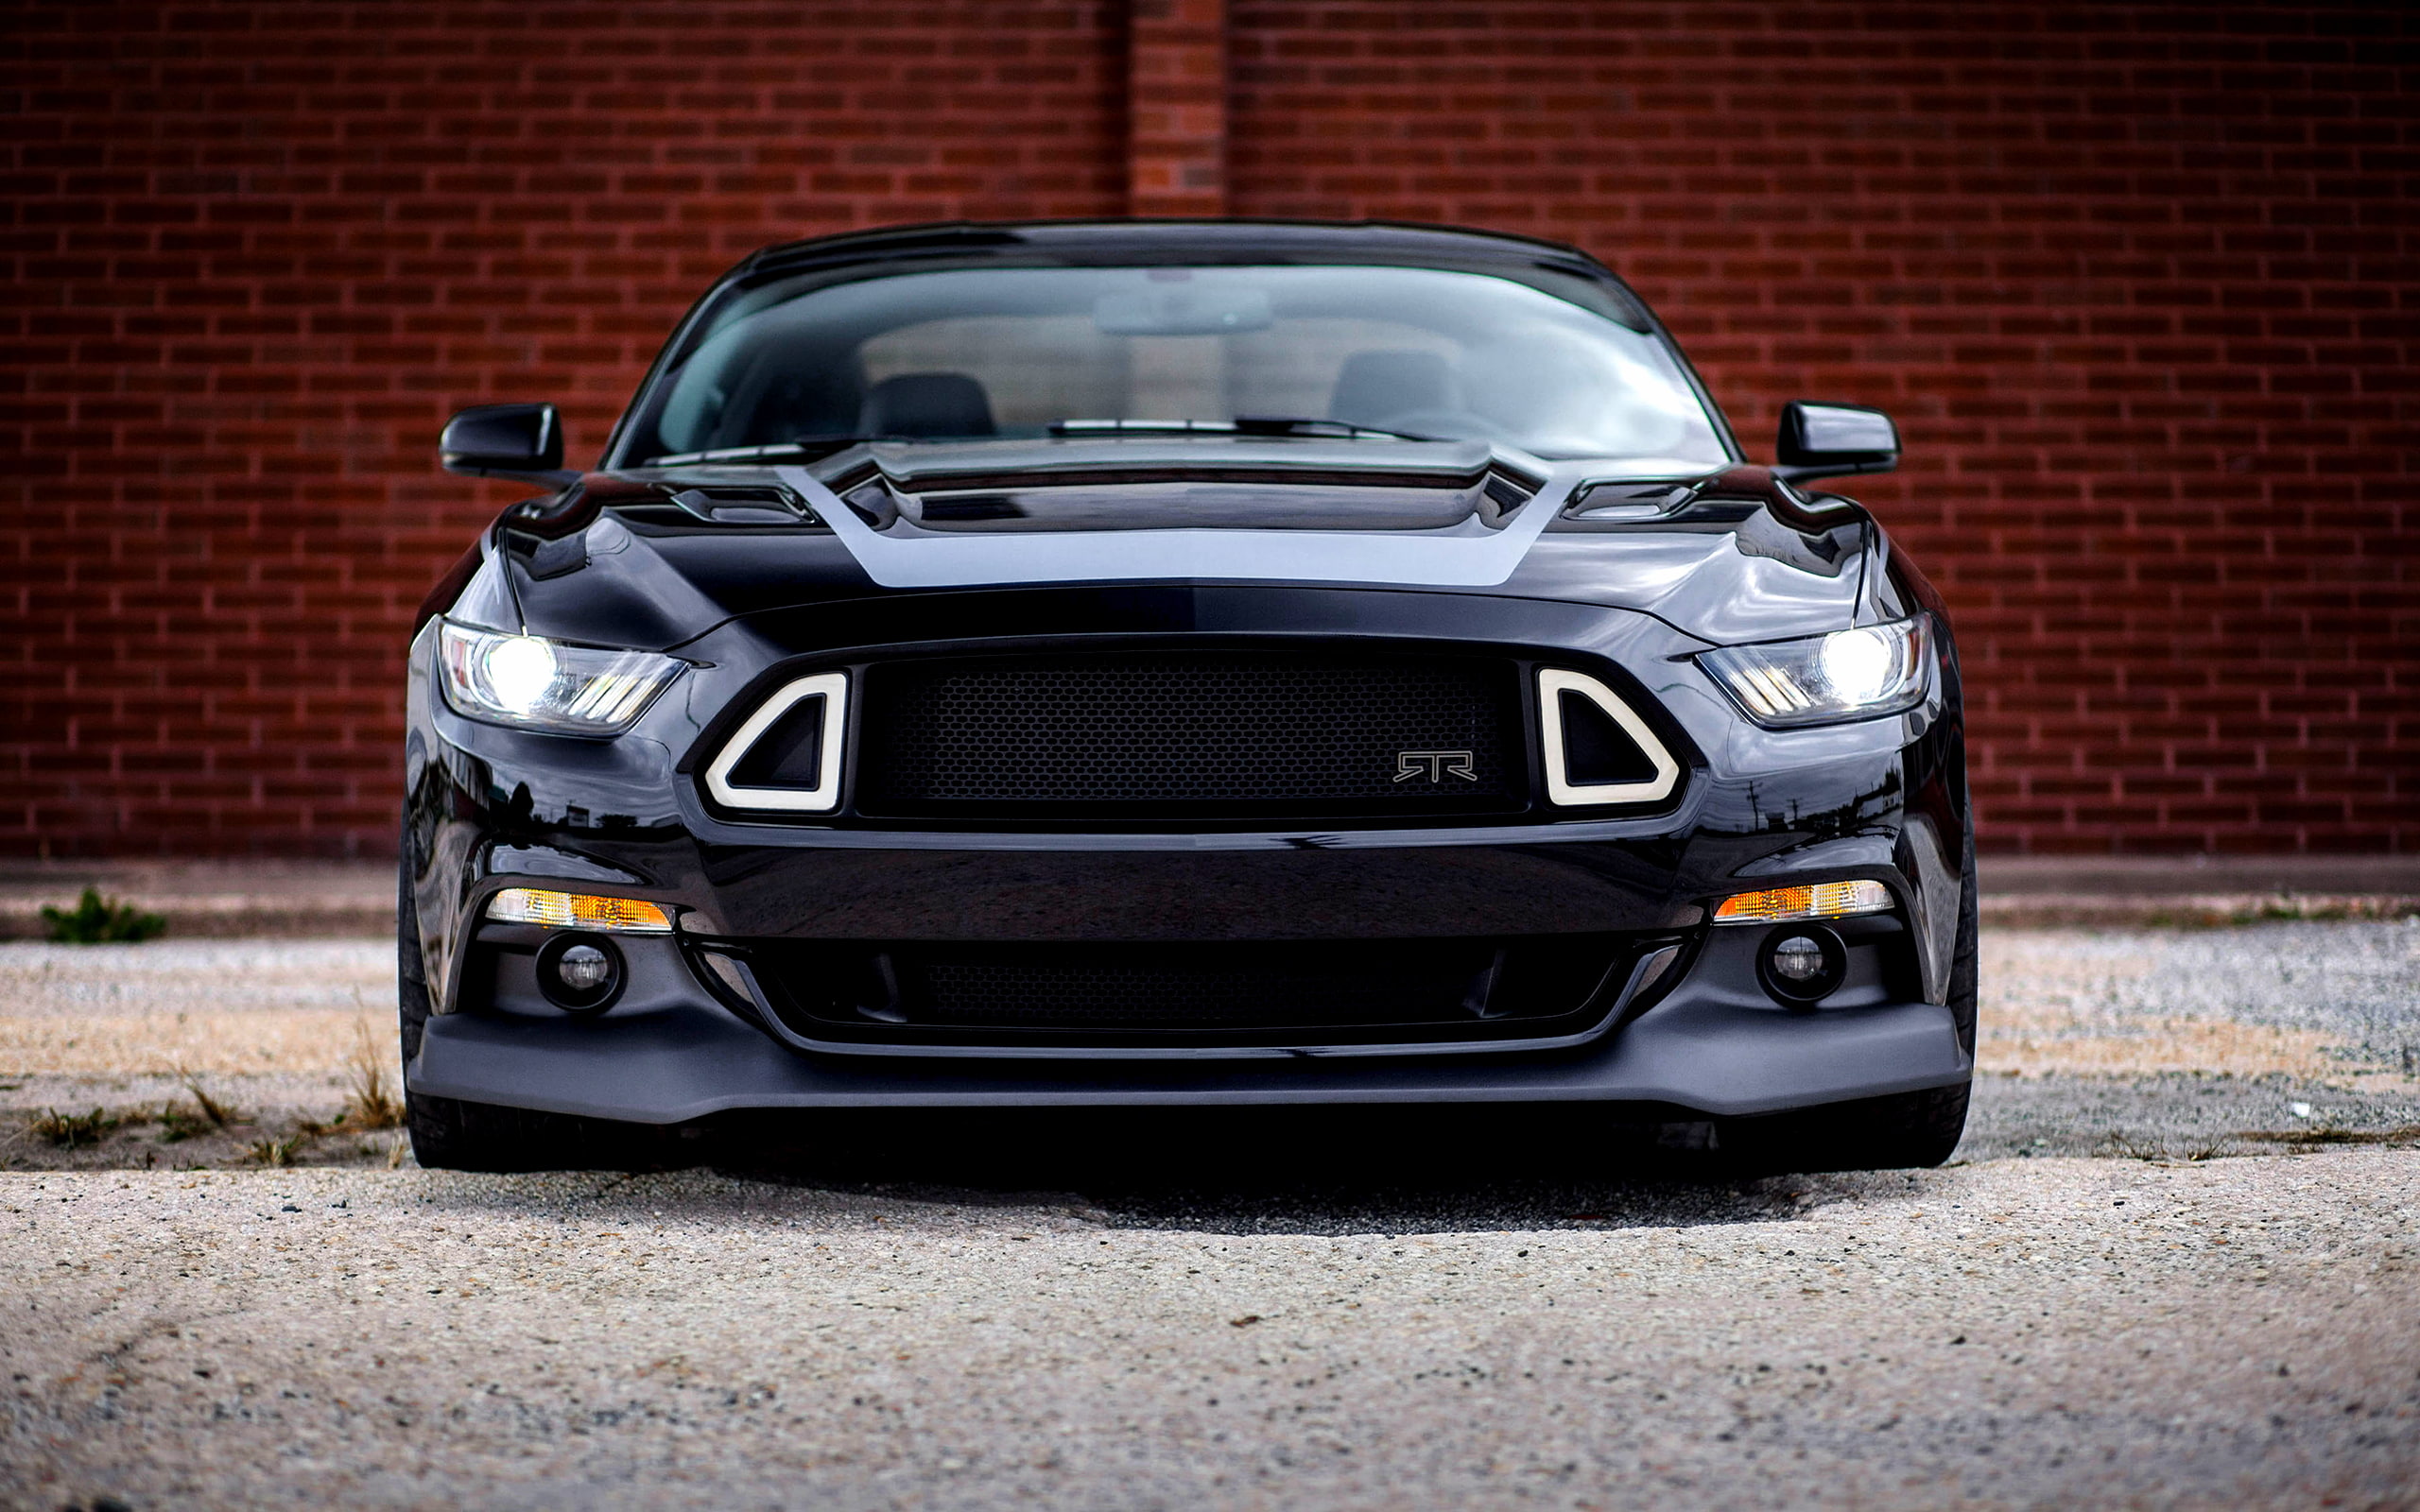 black car, Mustang, Ford, RTR, 2015, Spec 2, land Vehicle, sports Car